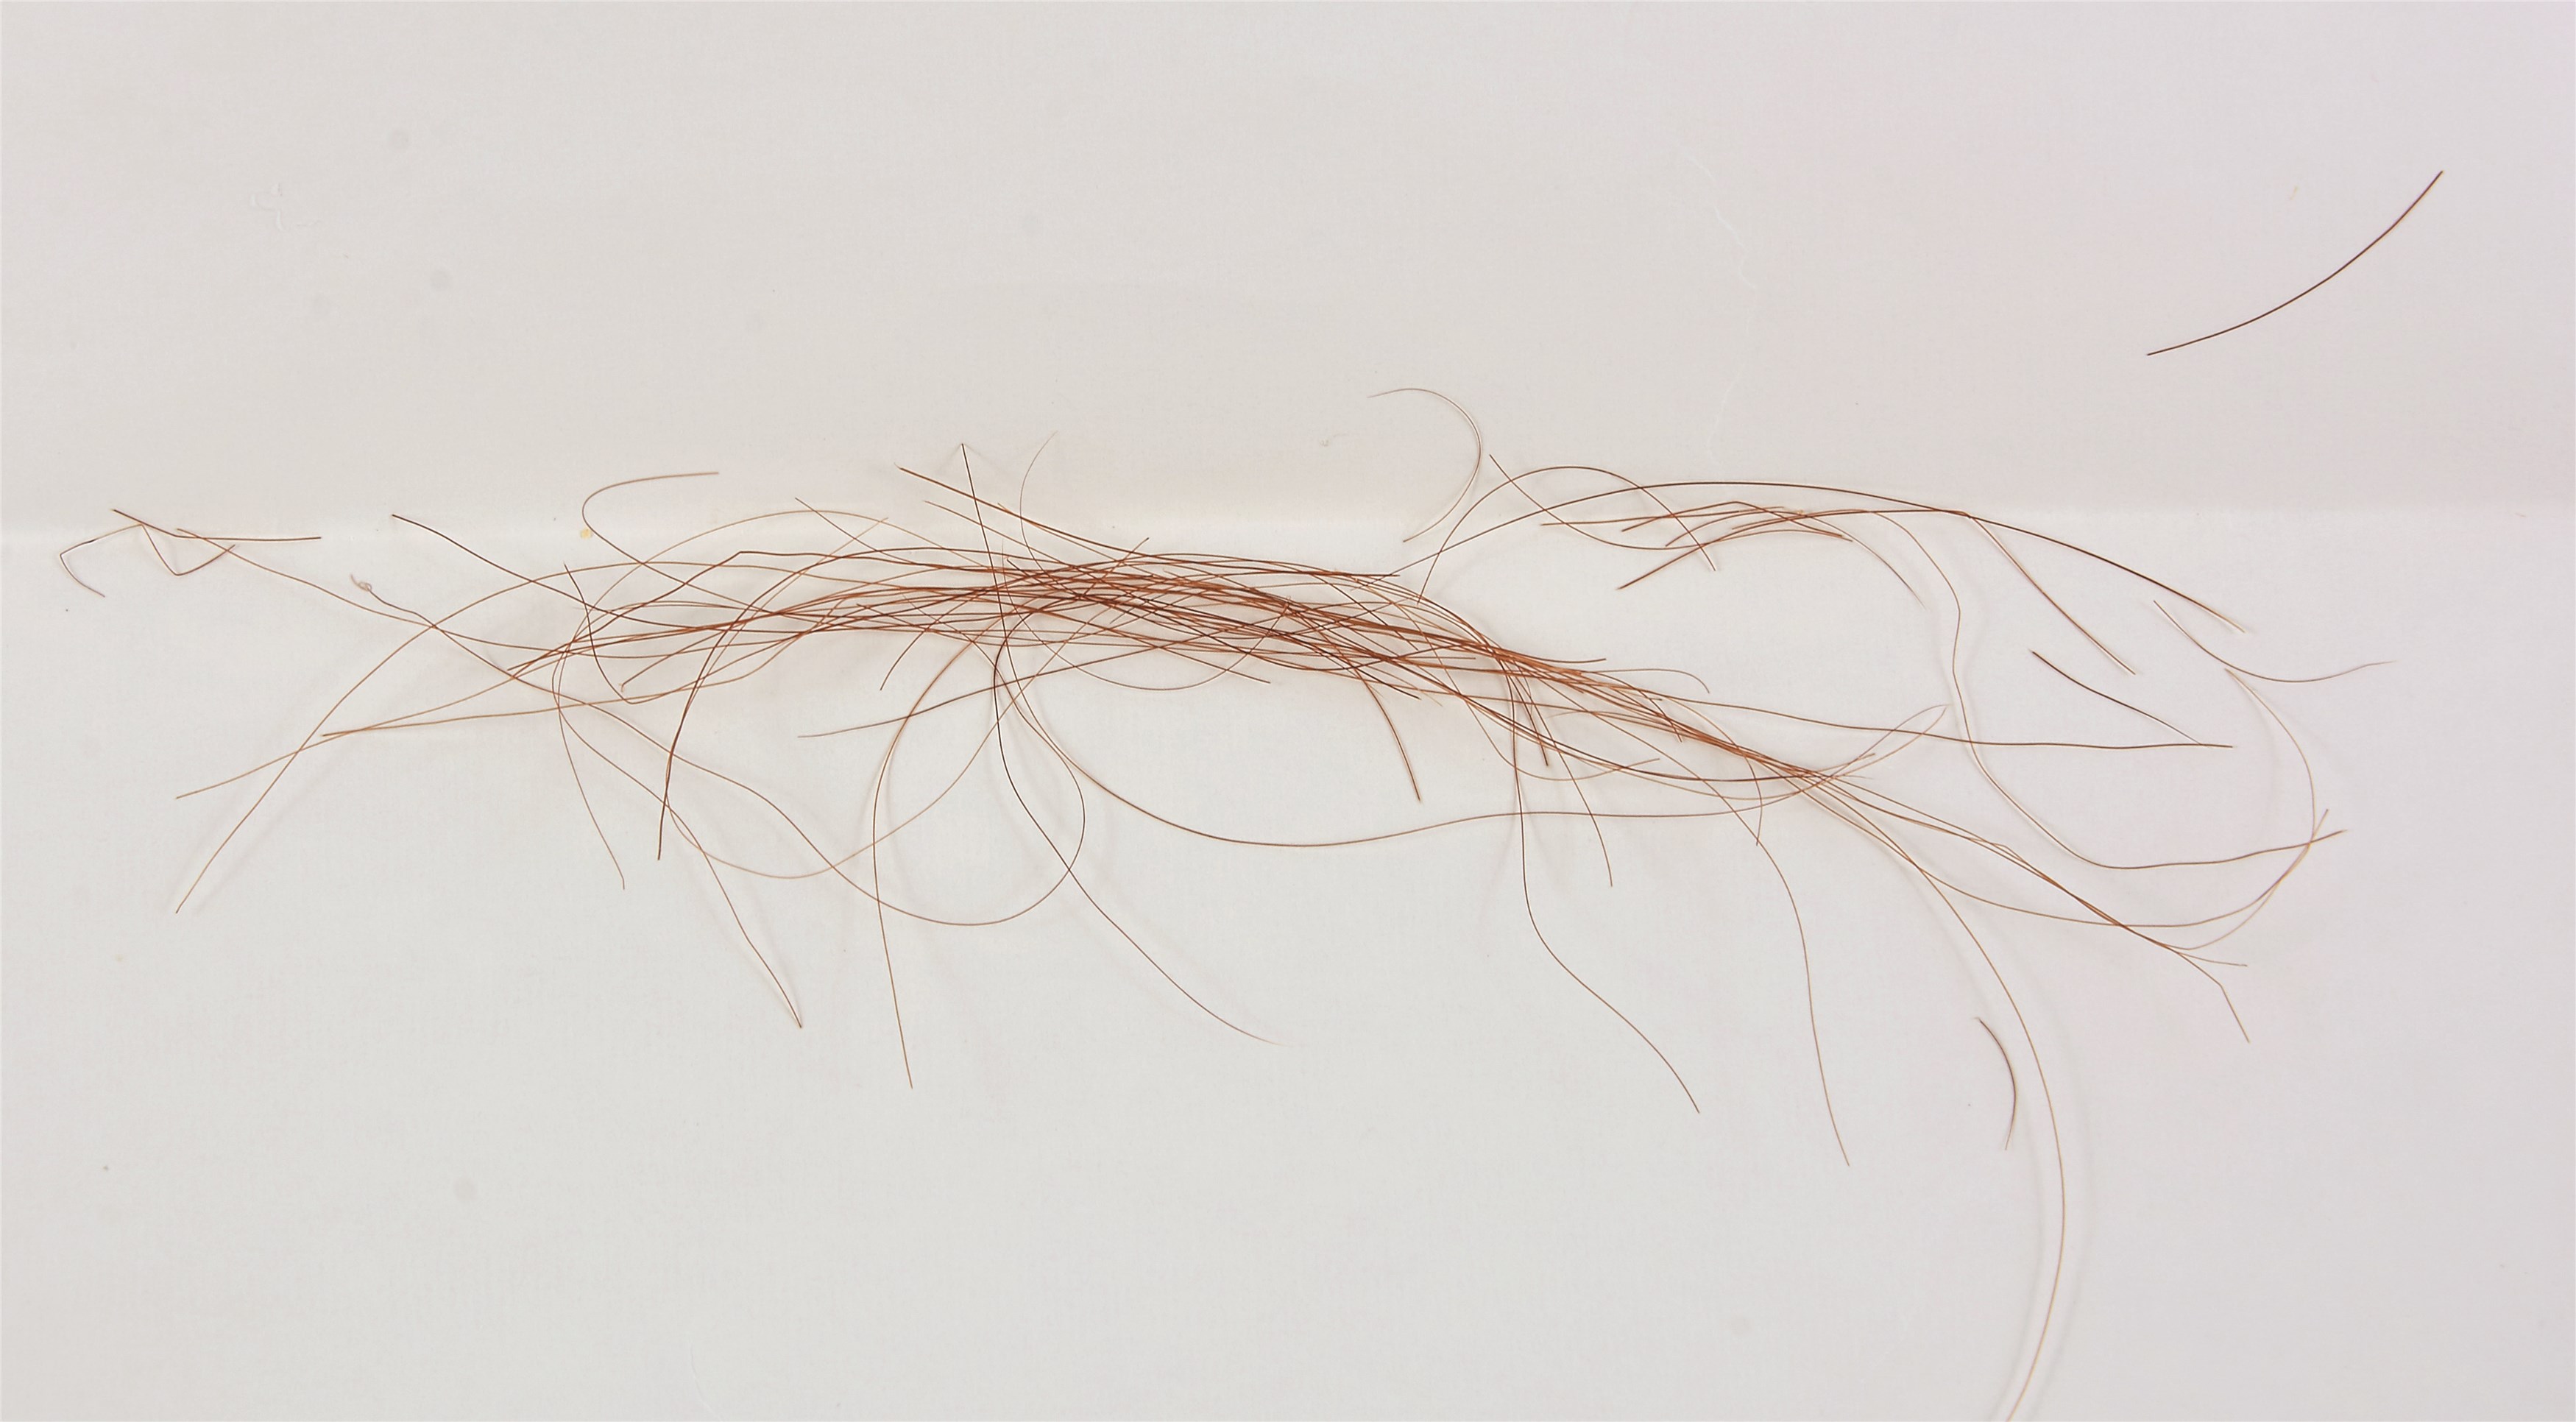 Horse Racing - 1973 Secretariat Mane Hair from Last Race & Triple Crown Year - Direct Provenance (ex-NRA Hall of Fame)